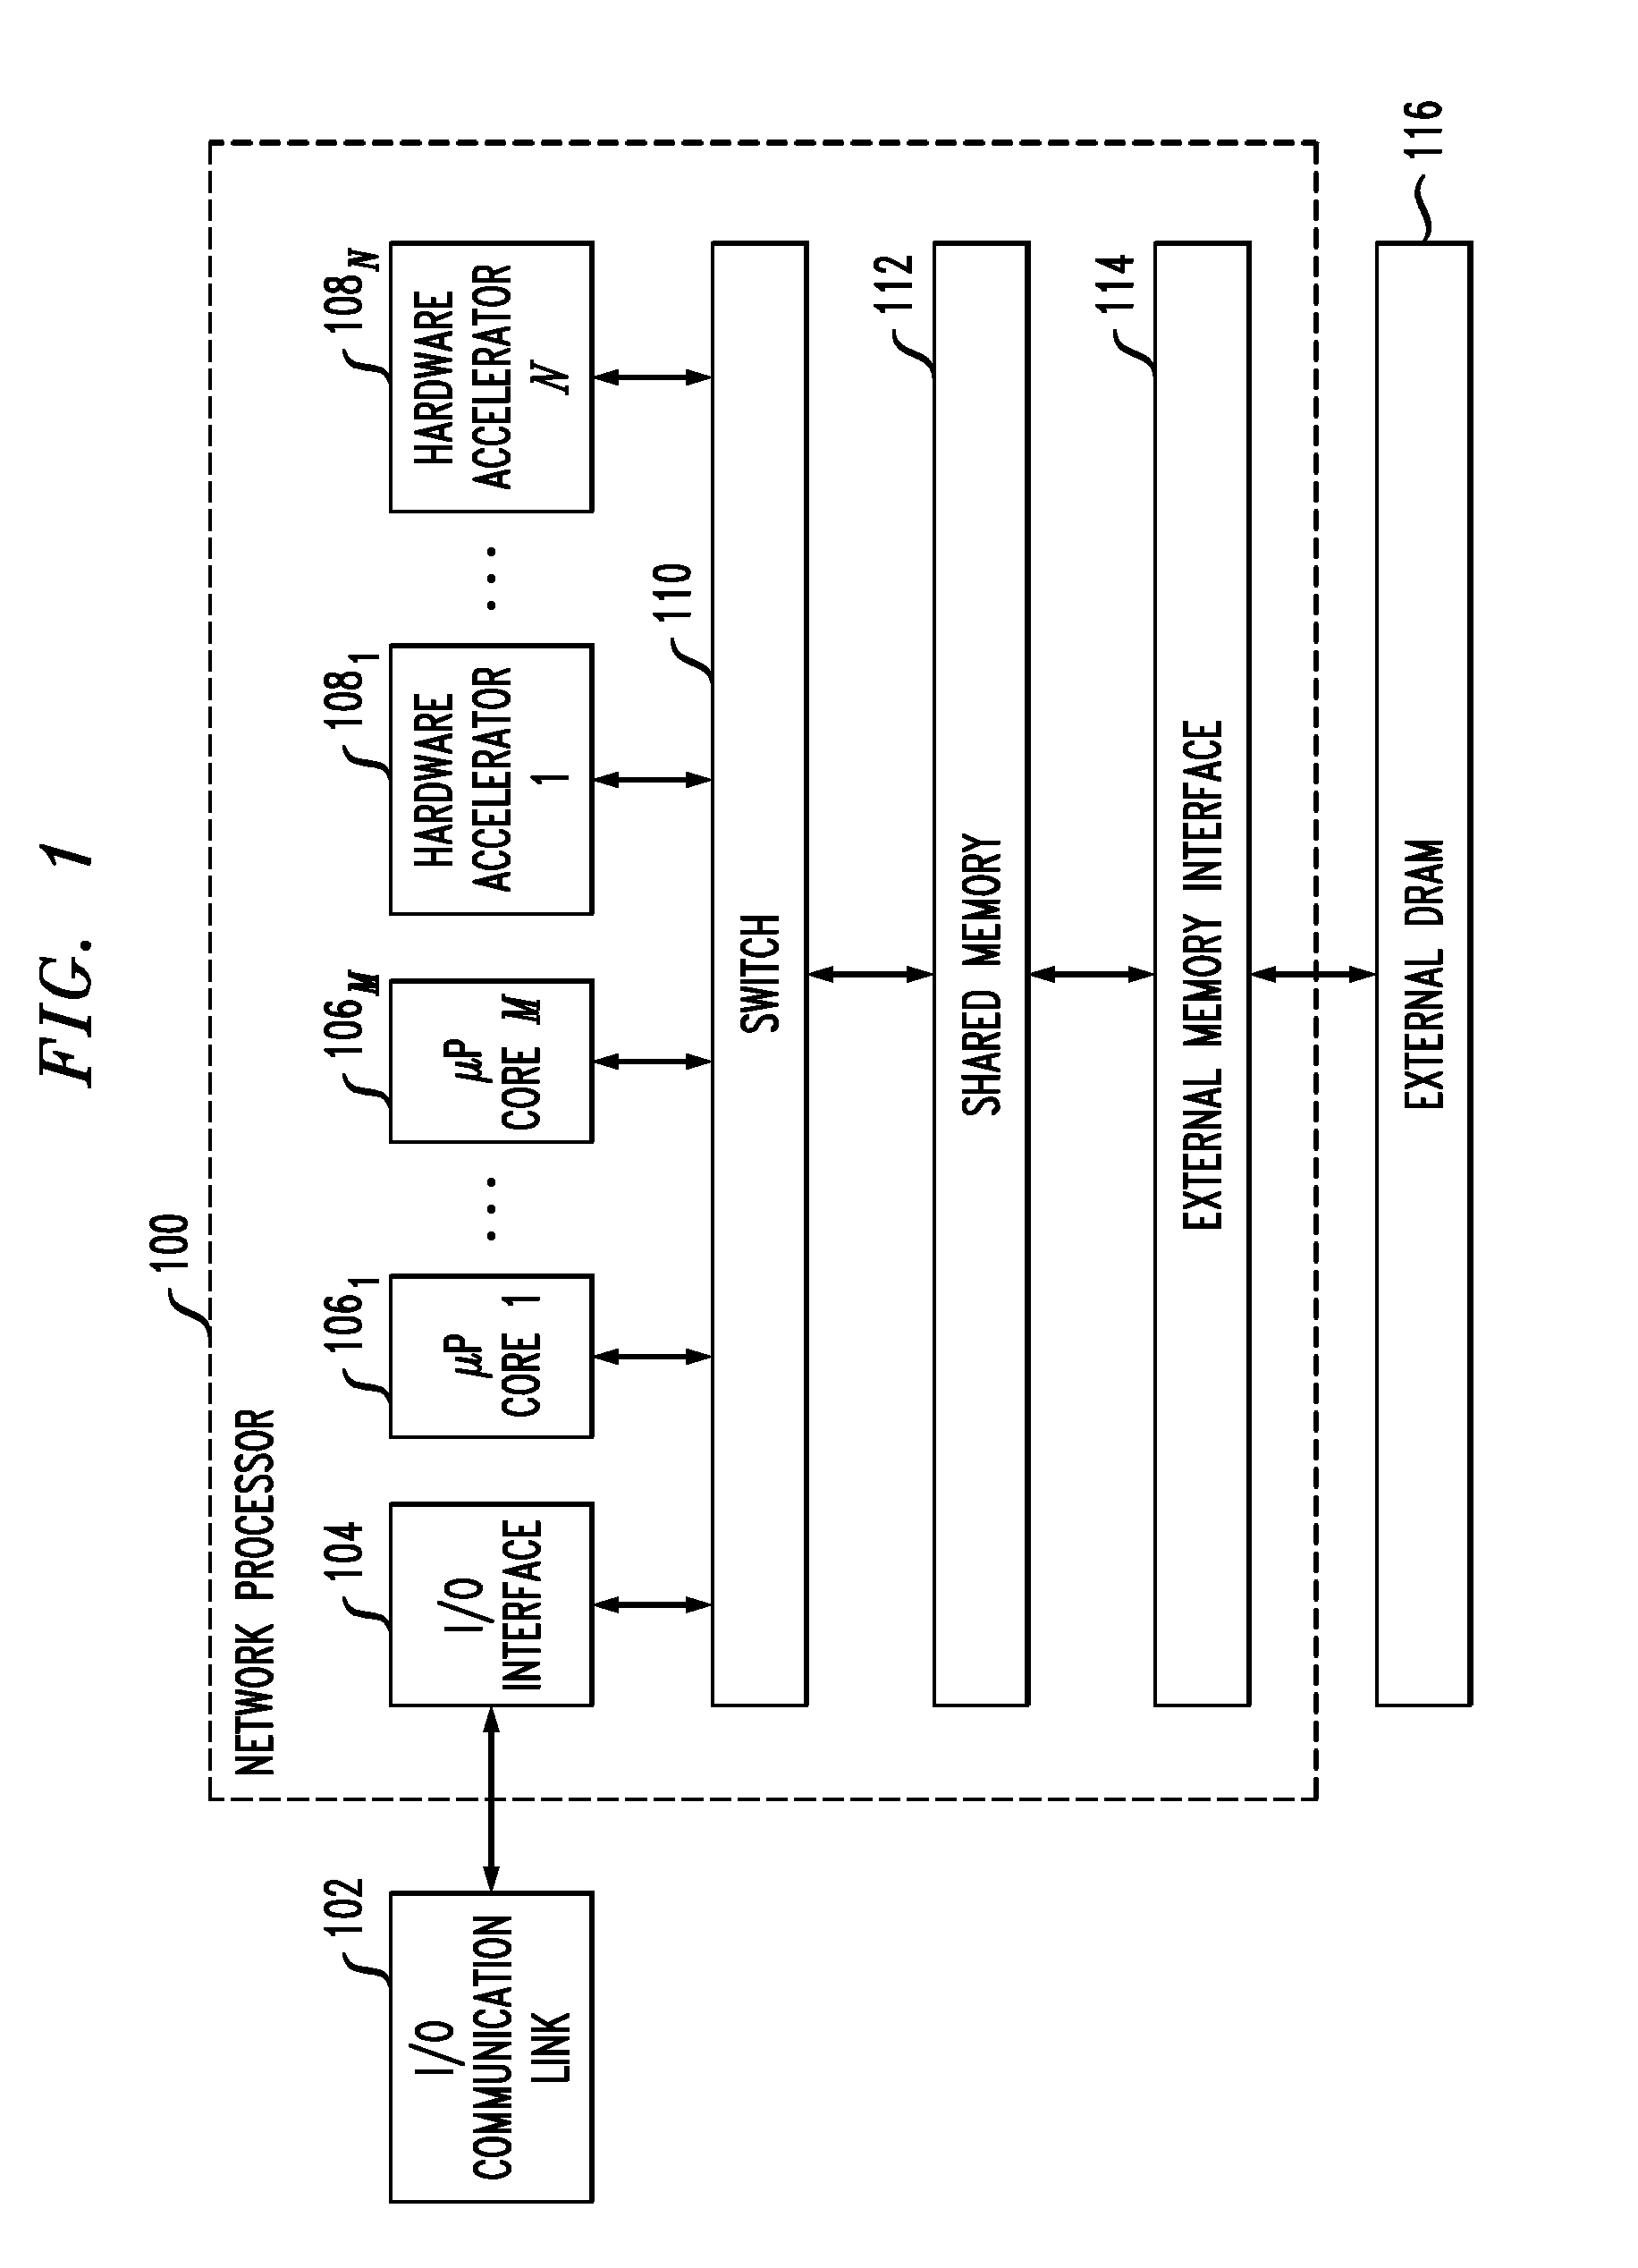 Memory manager for a network communications processor architecture